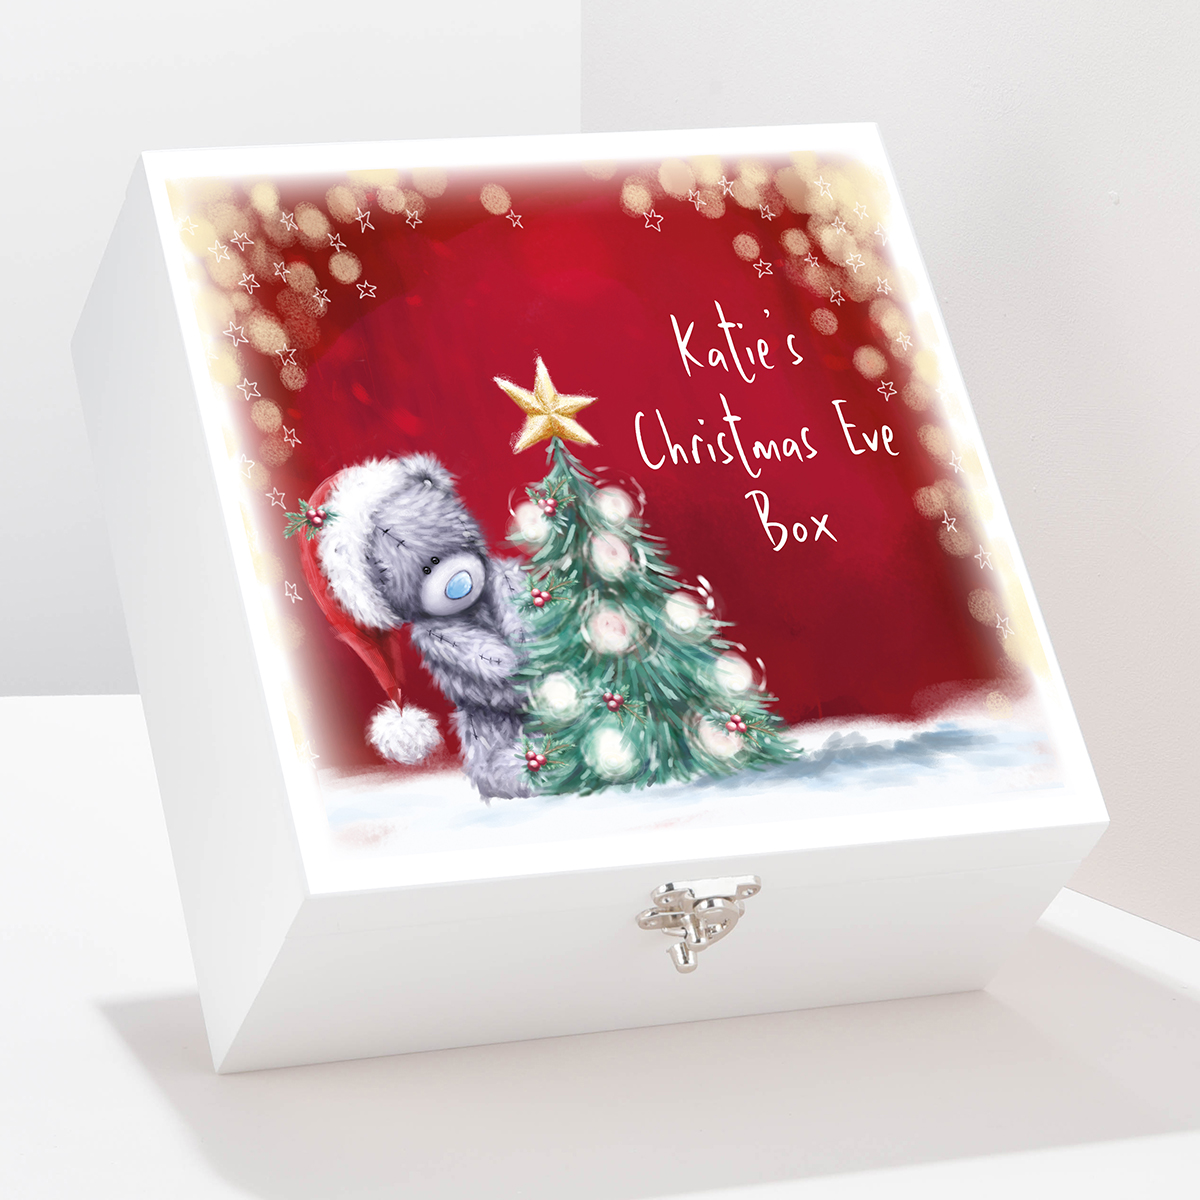 Personalised Me to You Wooden Storage Box - Christmas Eve